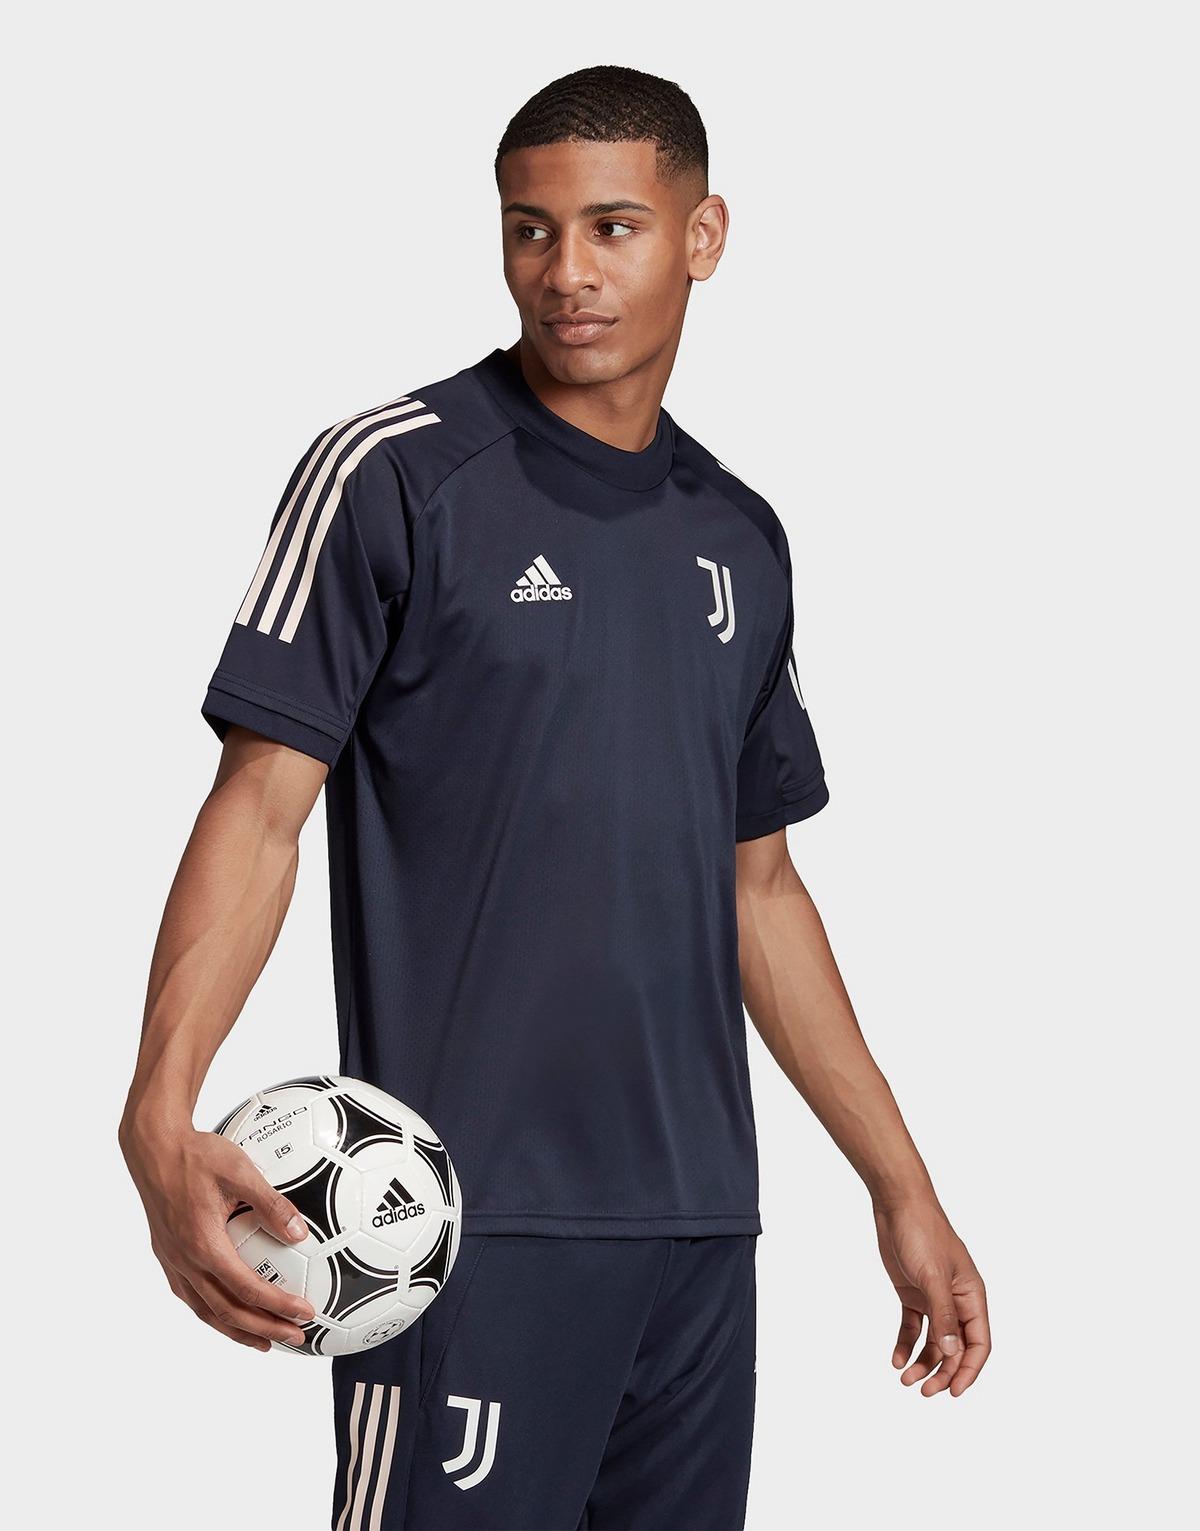 adidas Synthetic Juventus Training Jersey in Blue for Men - Lyst